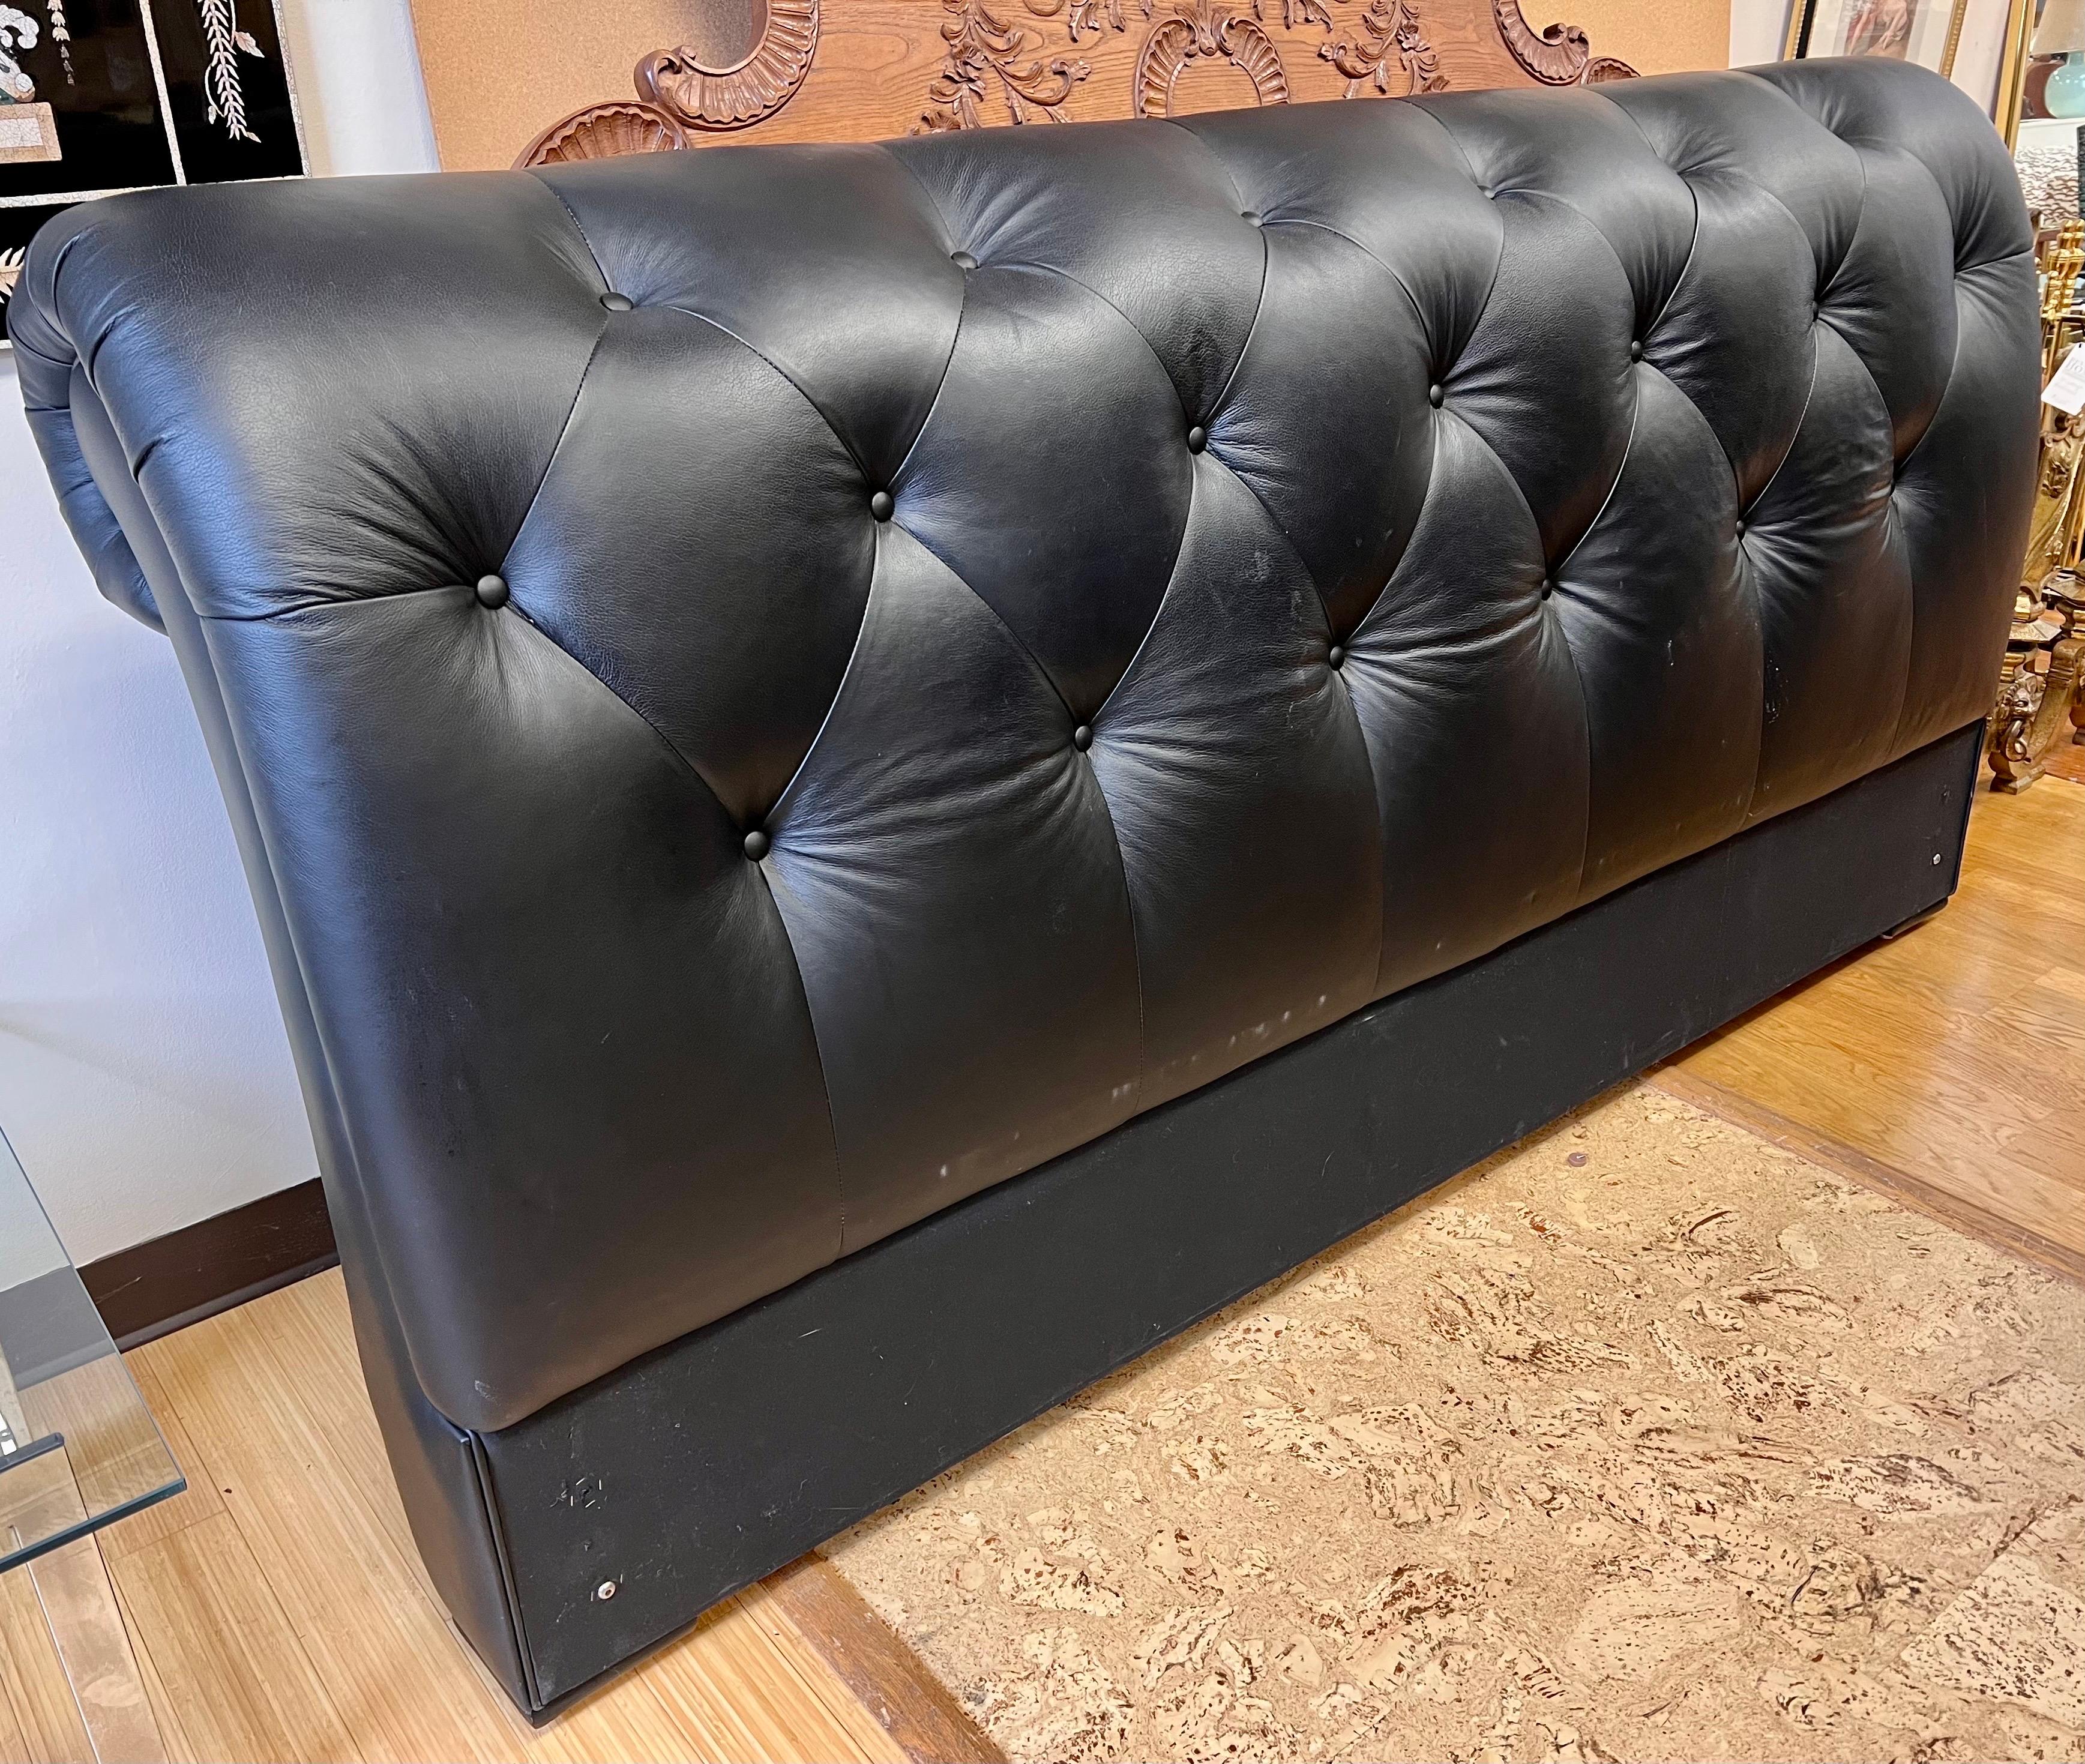 A handsome king-size tufted black leather headboard. Note there is no footboard or bed frame - just the headboard as shown. Has holes to screw in bed frame. Originally purchased at Lillian August.